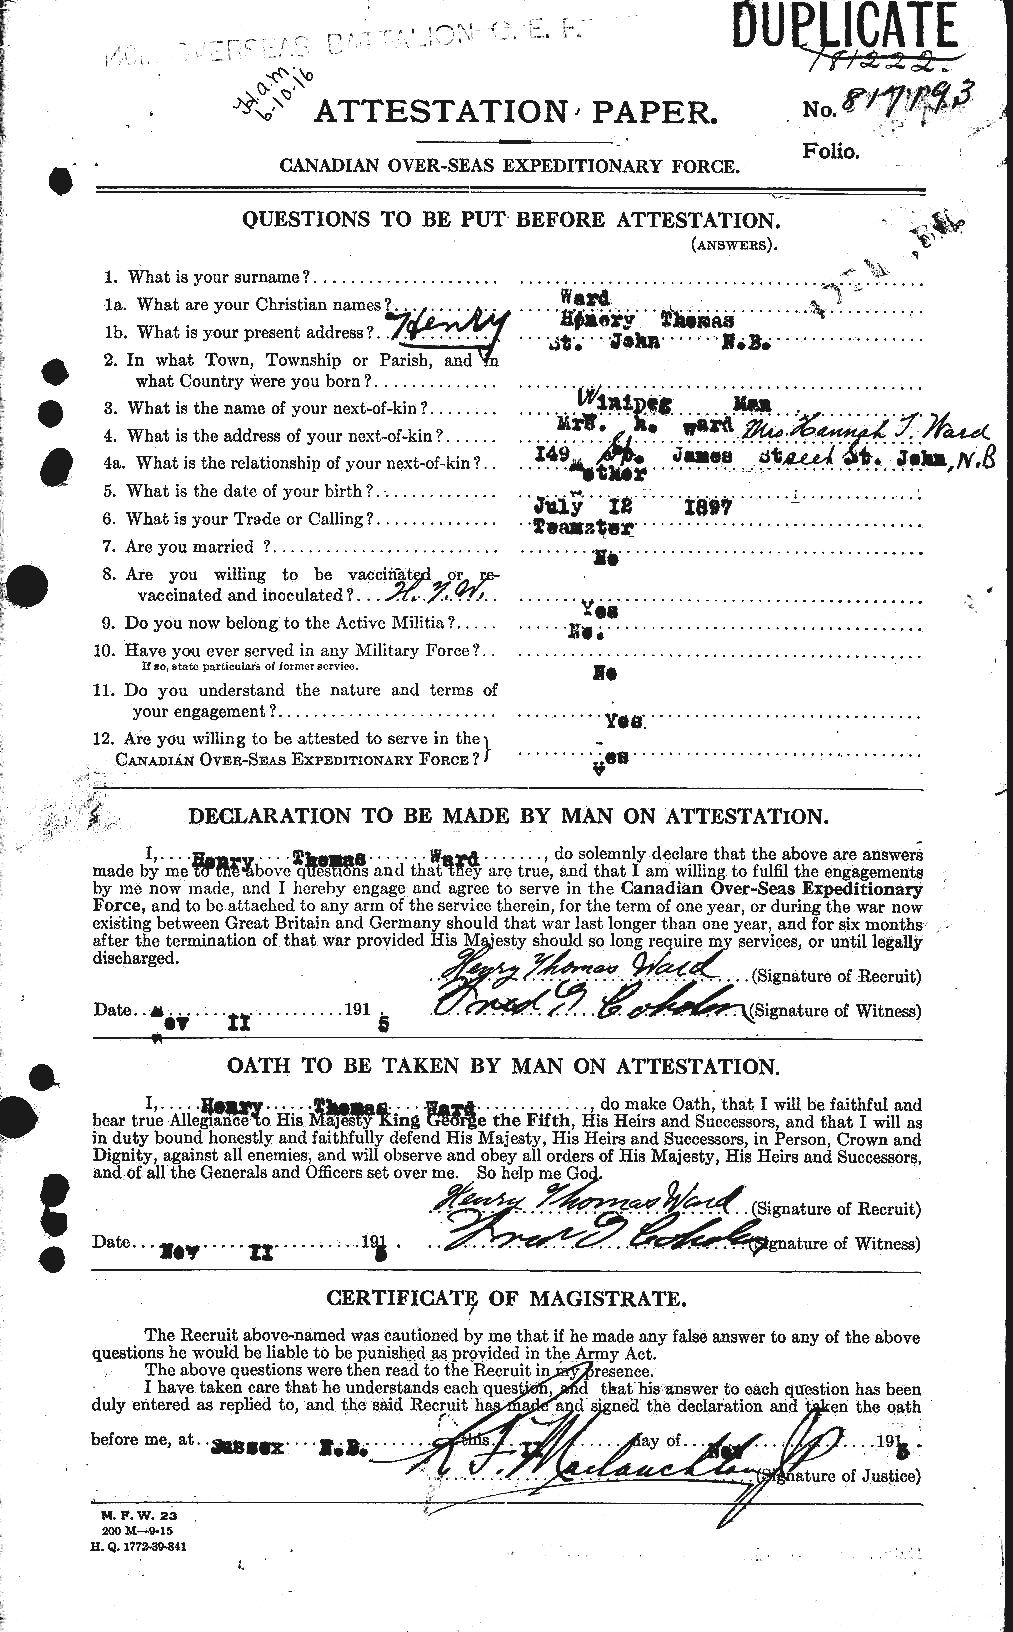 Personnel Records of the First World War - CEF 657844a